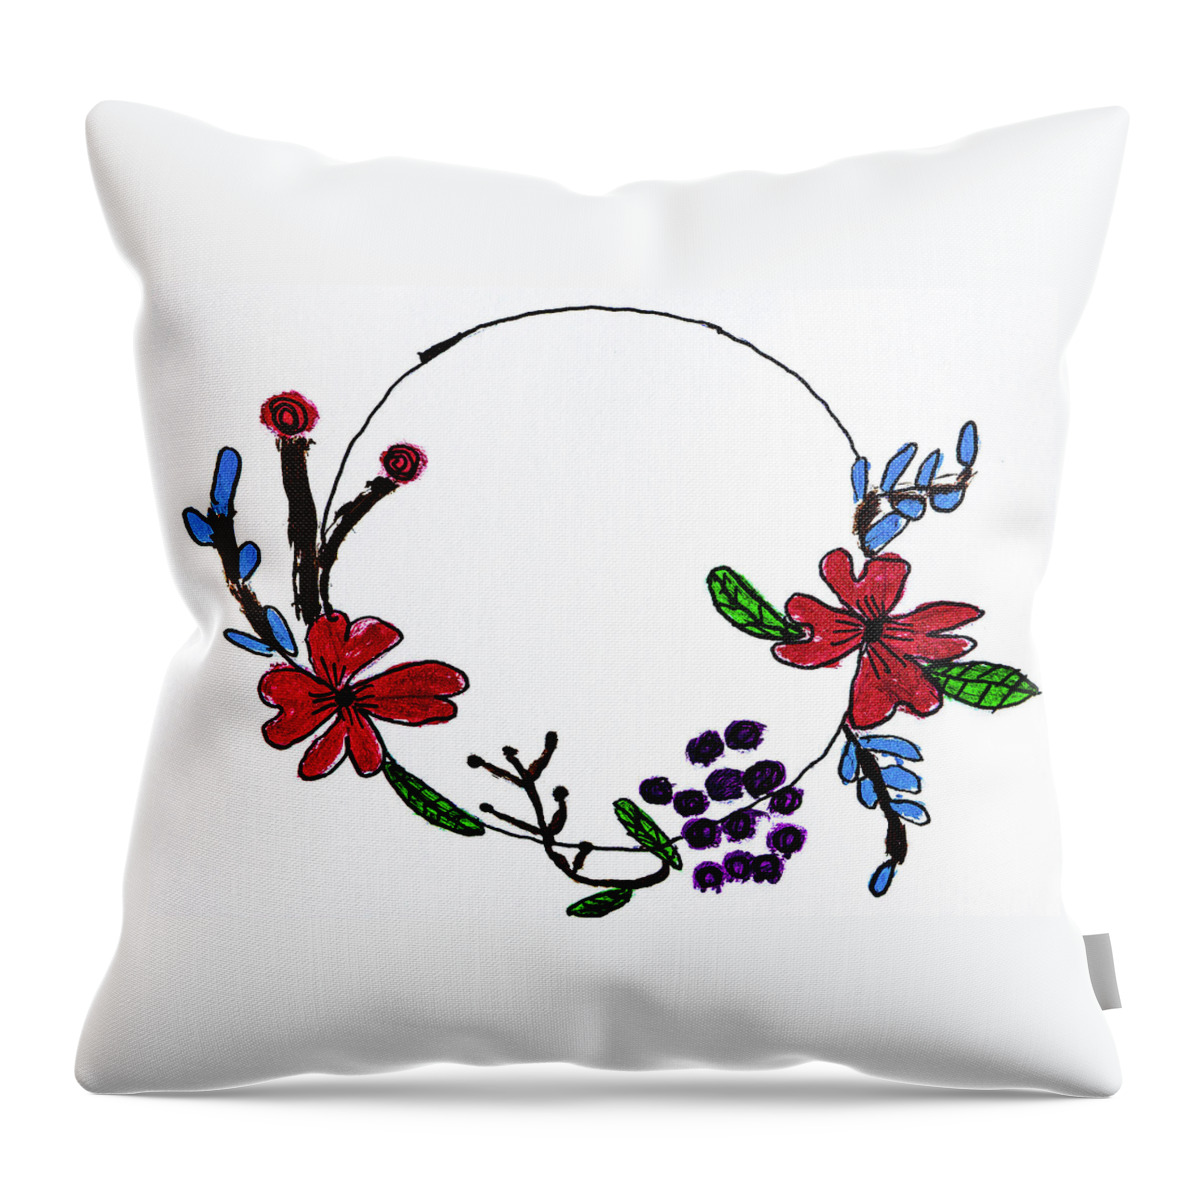 2020 Throw Pillow featuring the photograph Red Flower Circle by Maggie Mccall